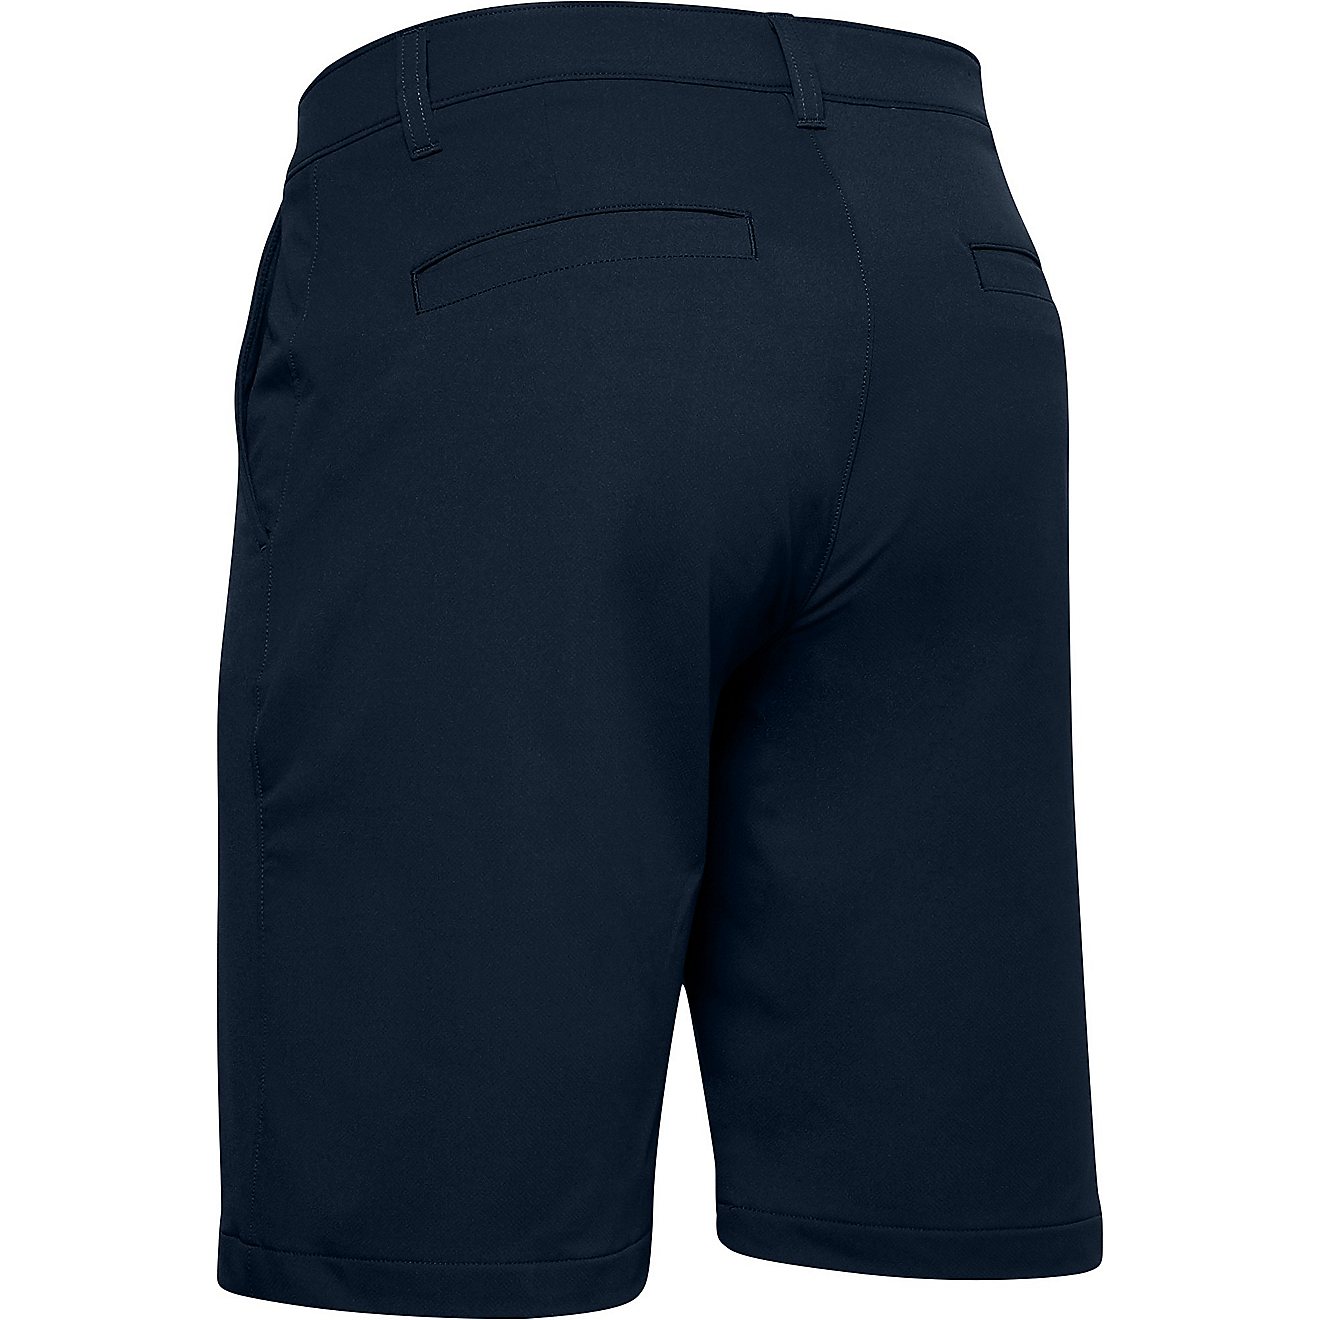 Under Armour Men's Tech Golf Shorts 10 in                                                                                        - view number 5